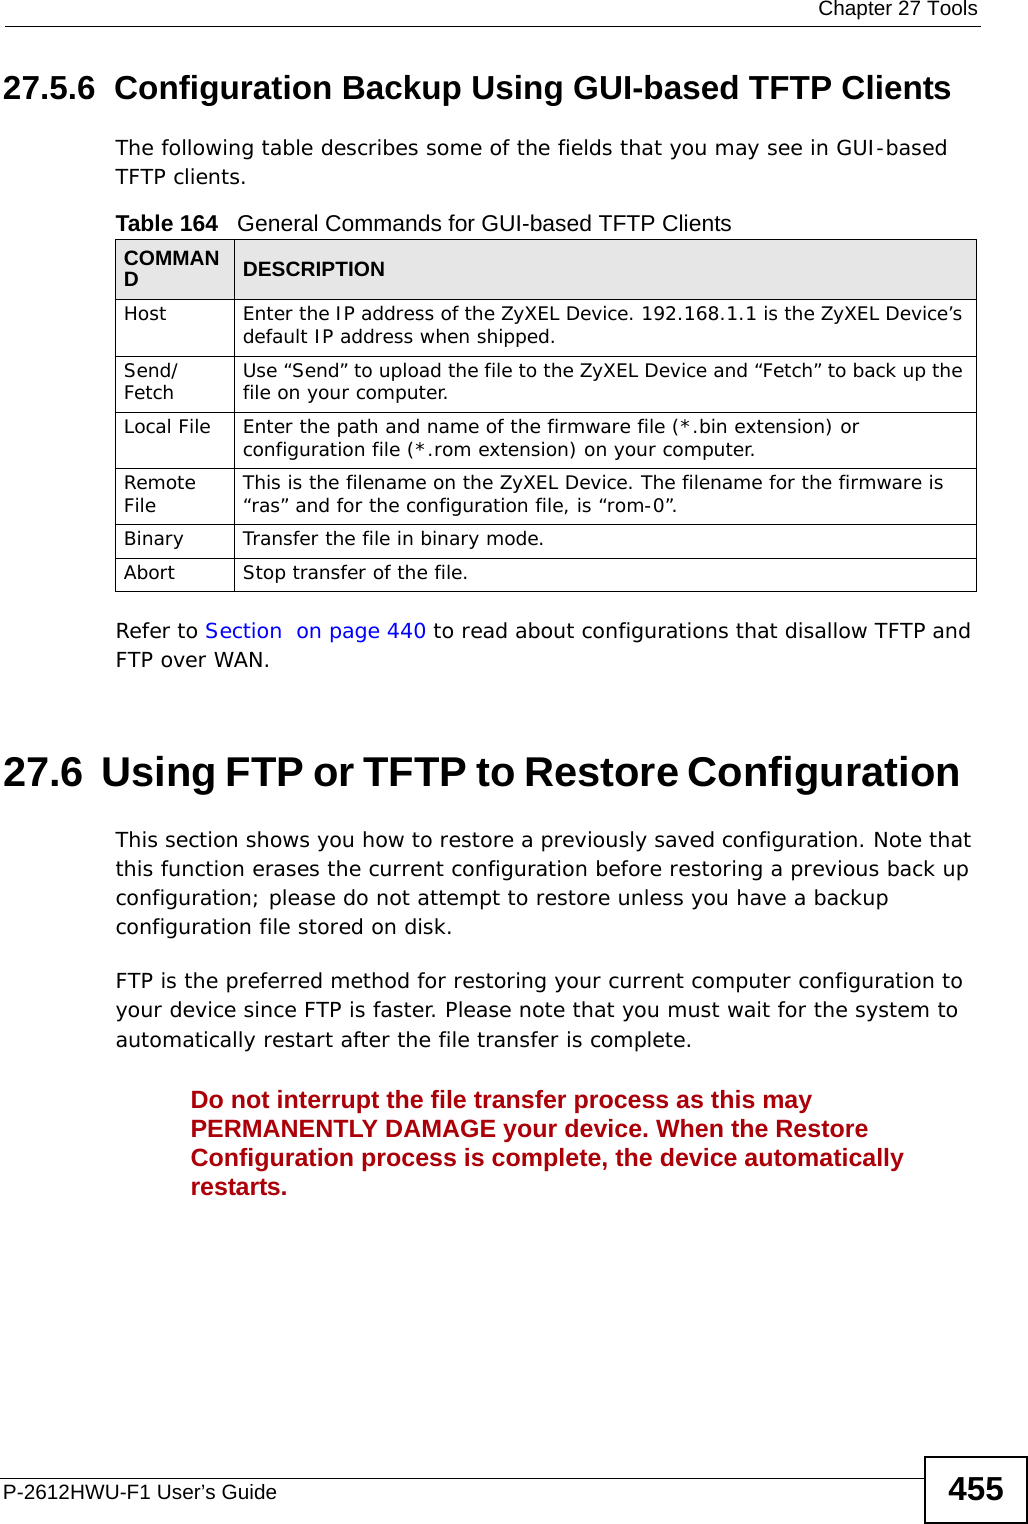  Chapter 27 ToolsP-2612HWU-F1 User’s Guide 45527.5.6  Configuration Backup Using GUI-based TFTP ClientsThe following table describes some of the fields that you may see in GUI-based TFTP clients.Refer to Section  on page 440 to read about configurations that disallow TFTP and FTP over WAN.27.6  Using FTP or TFTP to Restore Configuration  This section shows you how to restore a previously saved configuration. Note that this function erases the current configuration before restoring a previous back up configuration; please do not attempt to restore unless you have a backup configuration file stored on disk.  FTP is the preferred method for restoring your current computer configuration to your device since FTP is faster. Please note that you must wait for the system to automatically restart after the file transfer is complete.Do not interrupt the file transfer process as this may PERMANENTLY DAMAGE your device. When the Restore Configuration process is complete, the device automatically restarts.Table 164   General Commands for GUI-based TFTP ClientsCOMMANDDESCRIPTIONHost Enter the IP address of the ZyXEL Device. 192.168.1.1 is the ZyXEL Device’s default IP address when shipped.Send/Fetch Use “Send” to upload the file to the ZyXEL Device and “Fetch” to back up the file on your computer. Local File Enter the path and name of the firmware file (*.bin extension) or configuration file (*.rom extension) on your computer.Remote File This is the filename on the ZyXEL Device. The filename for the firmware is “ras” and for the configuration file, is “rom-0”.Binary Transfer the file in binary mode.Abort Stop transfer of the file.